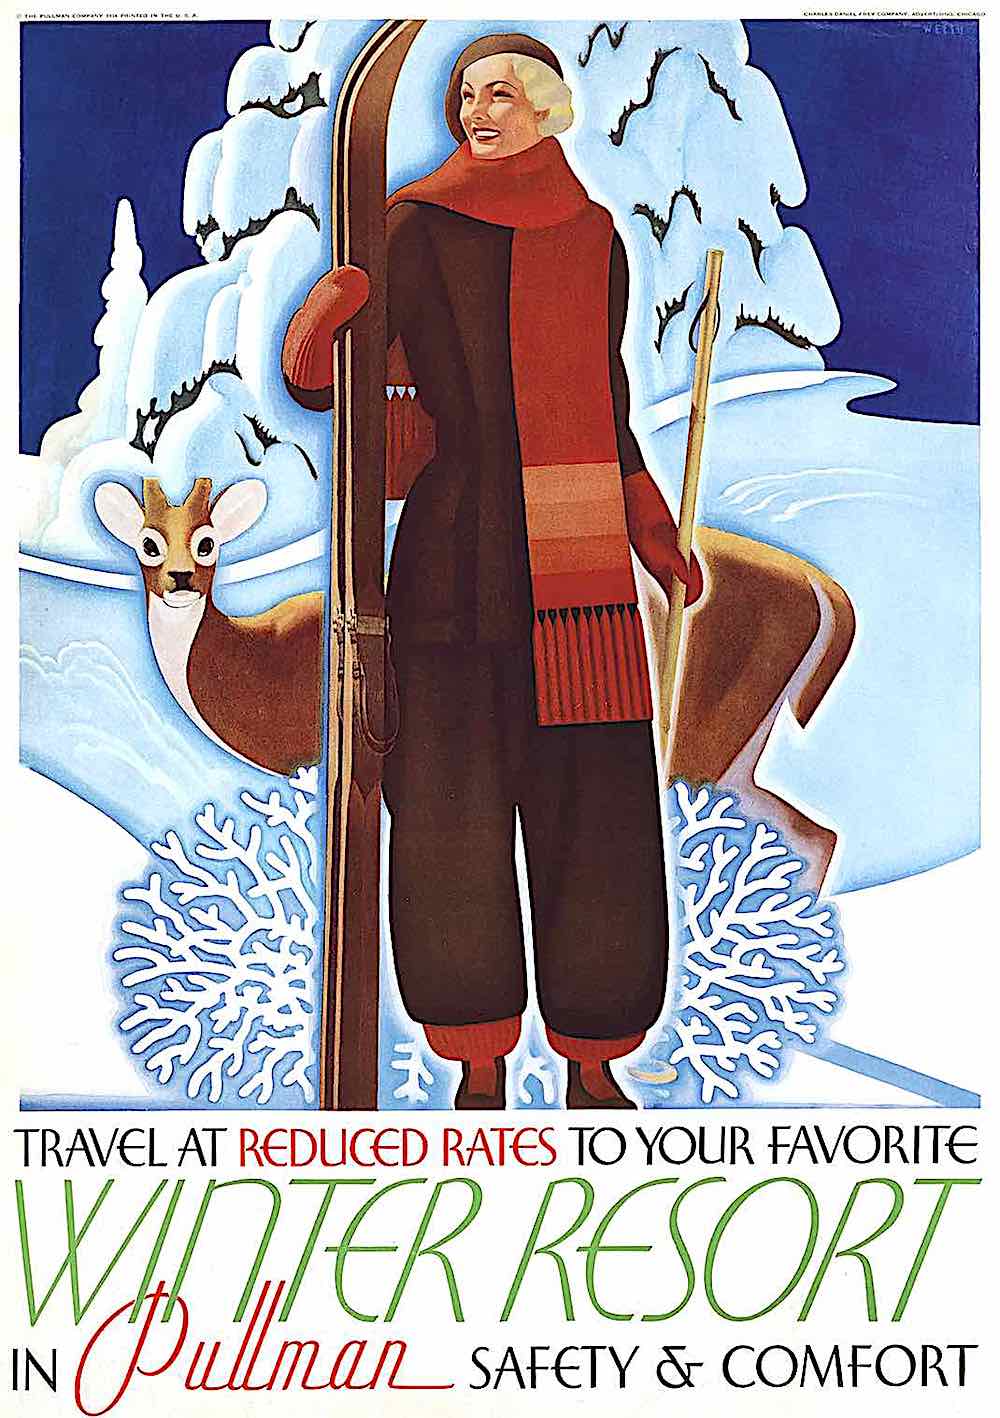 a William Welsh poster, 1930s